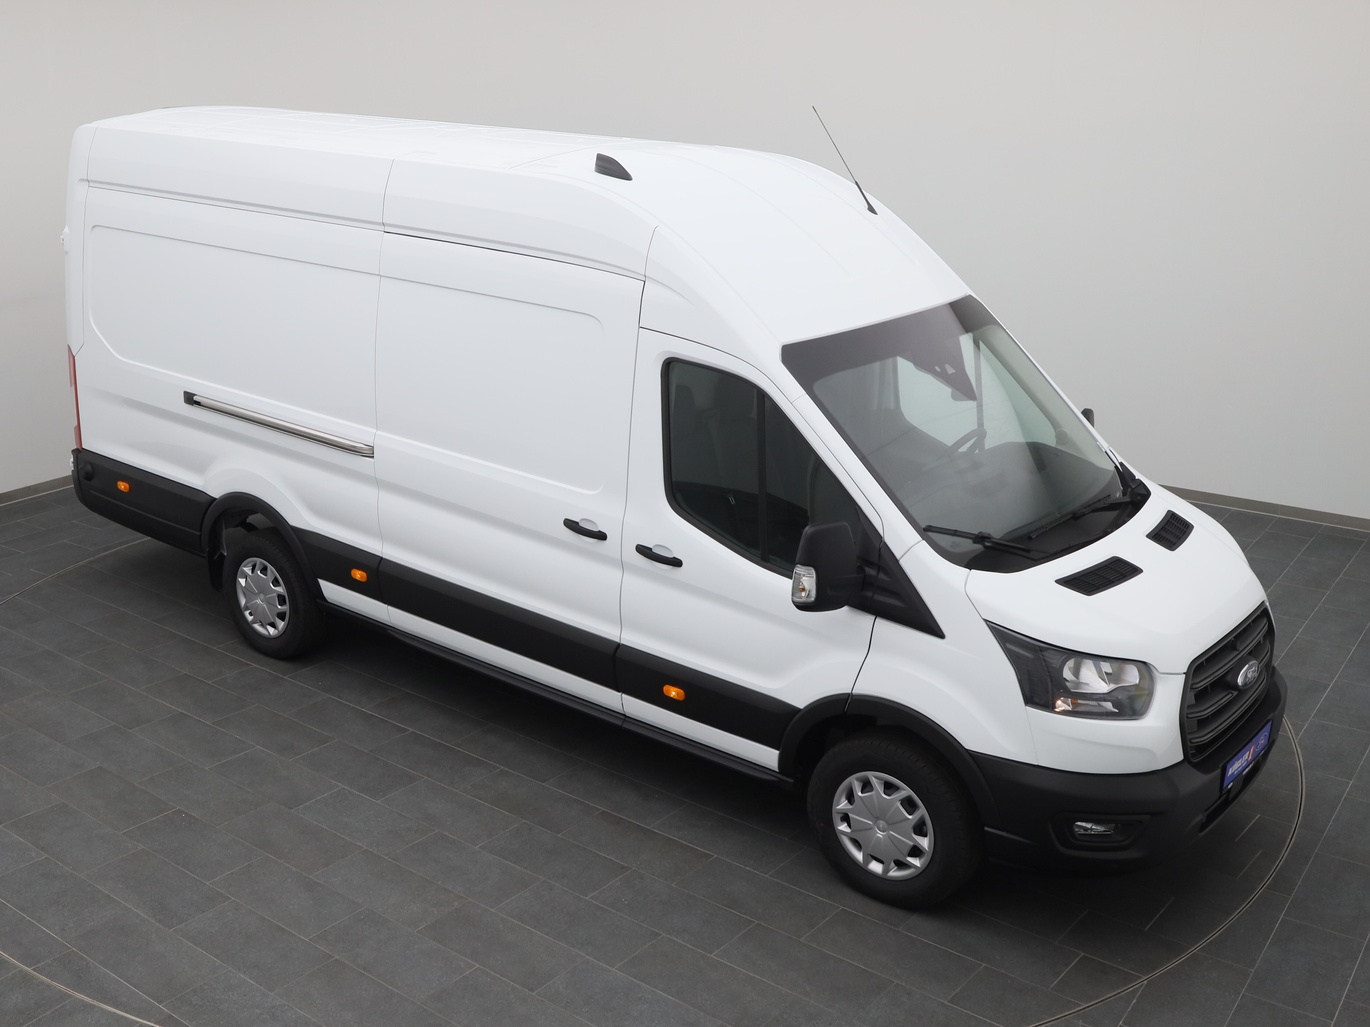  Ford Transit Kasten 350 L4H3 Trend 130PS HA in Weiss 